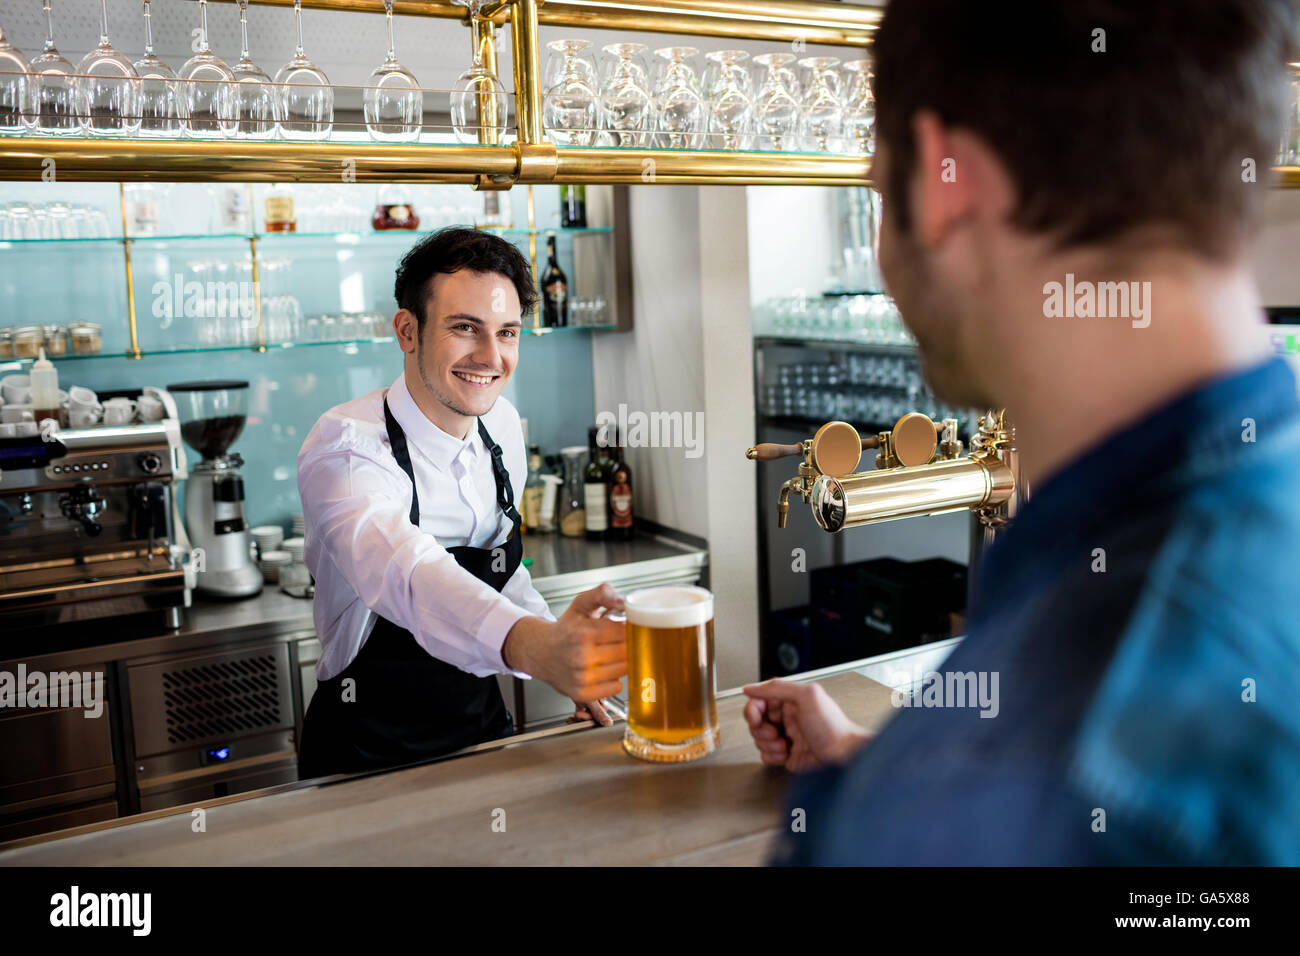 Bartender serving beer to male customer Stock Photo